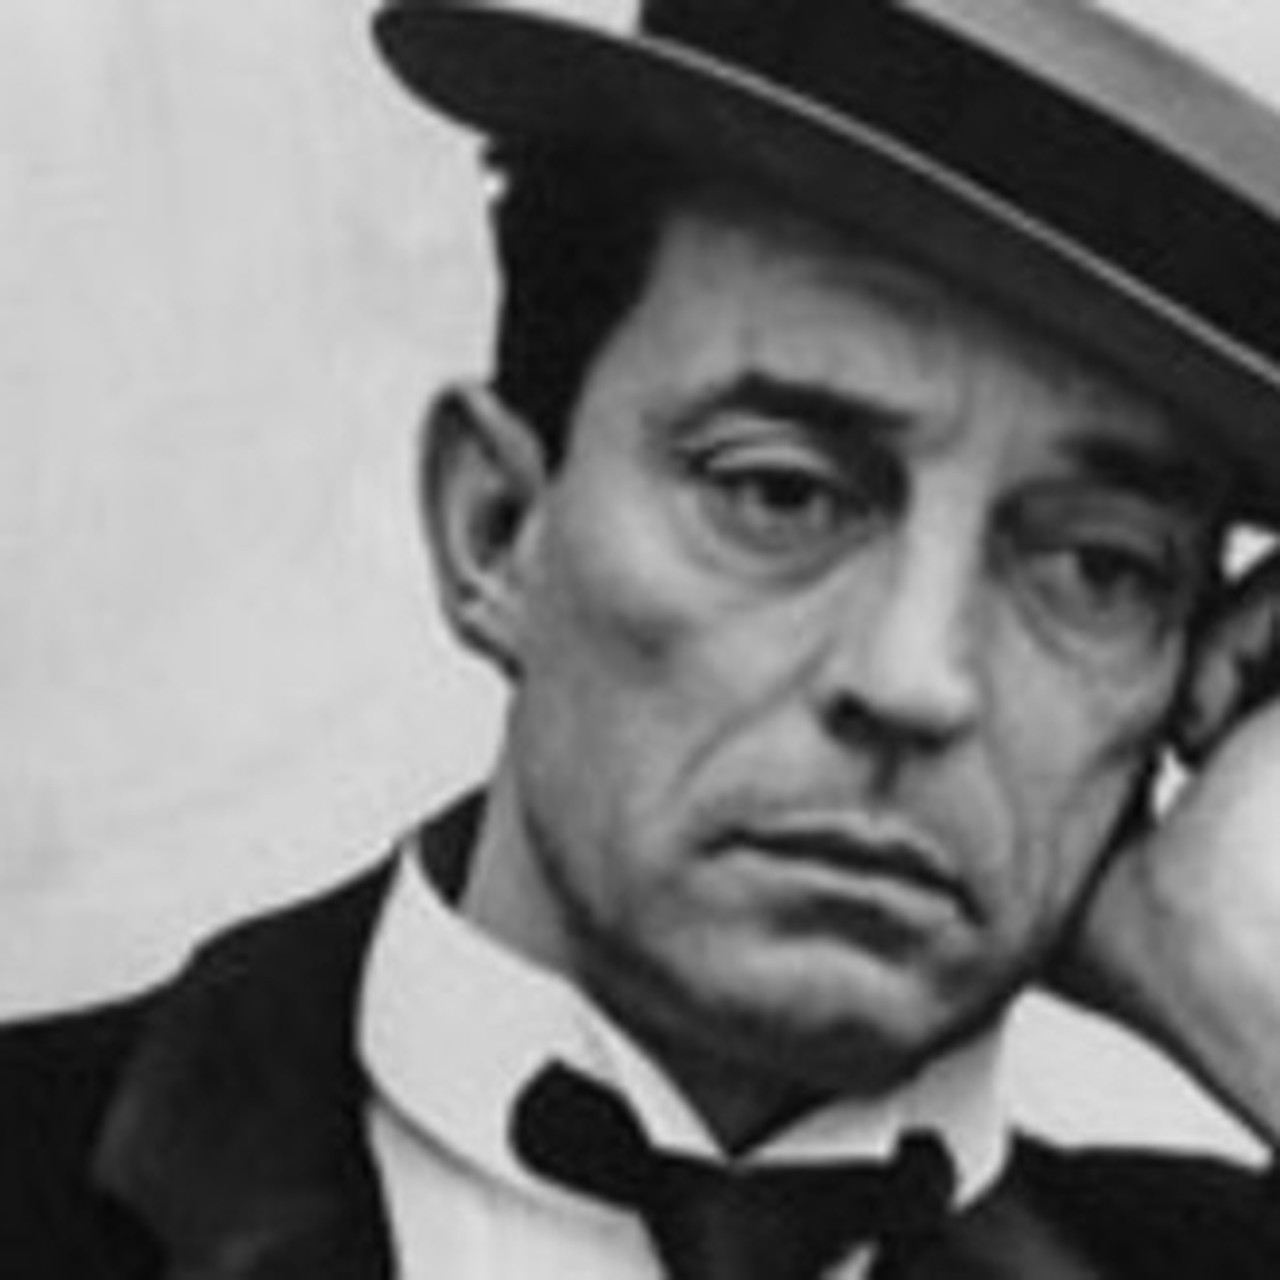 MoMA Presents: Buster Keaton's Our Hospitality